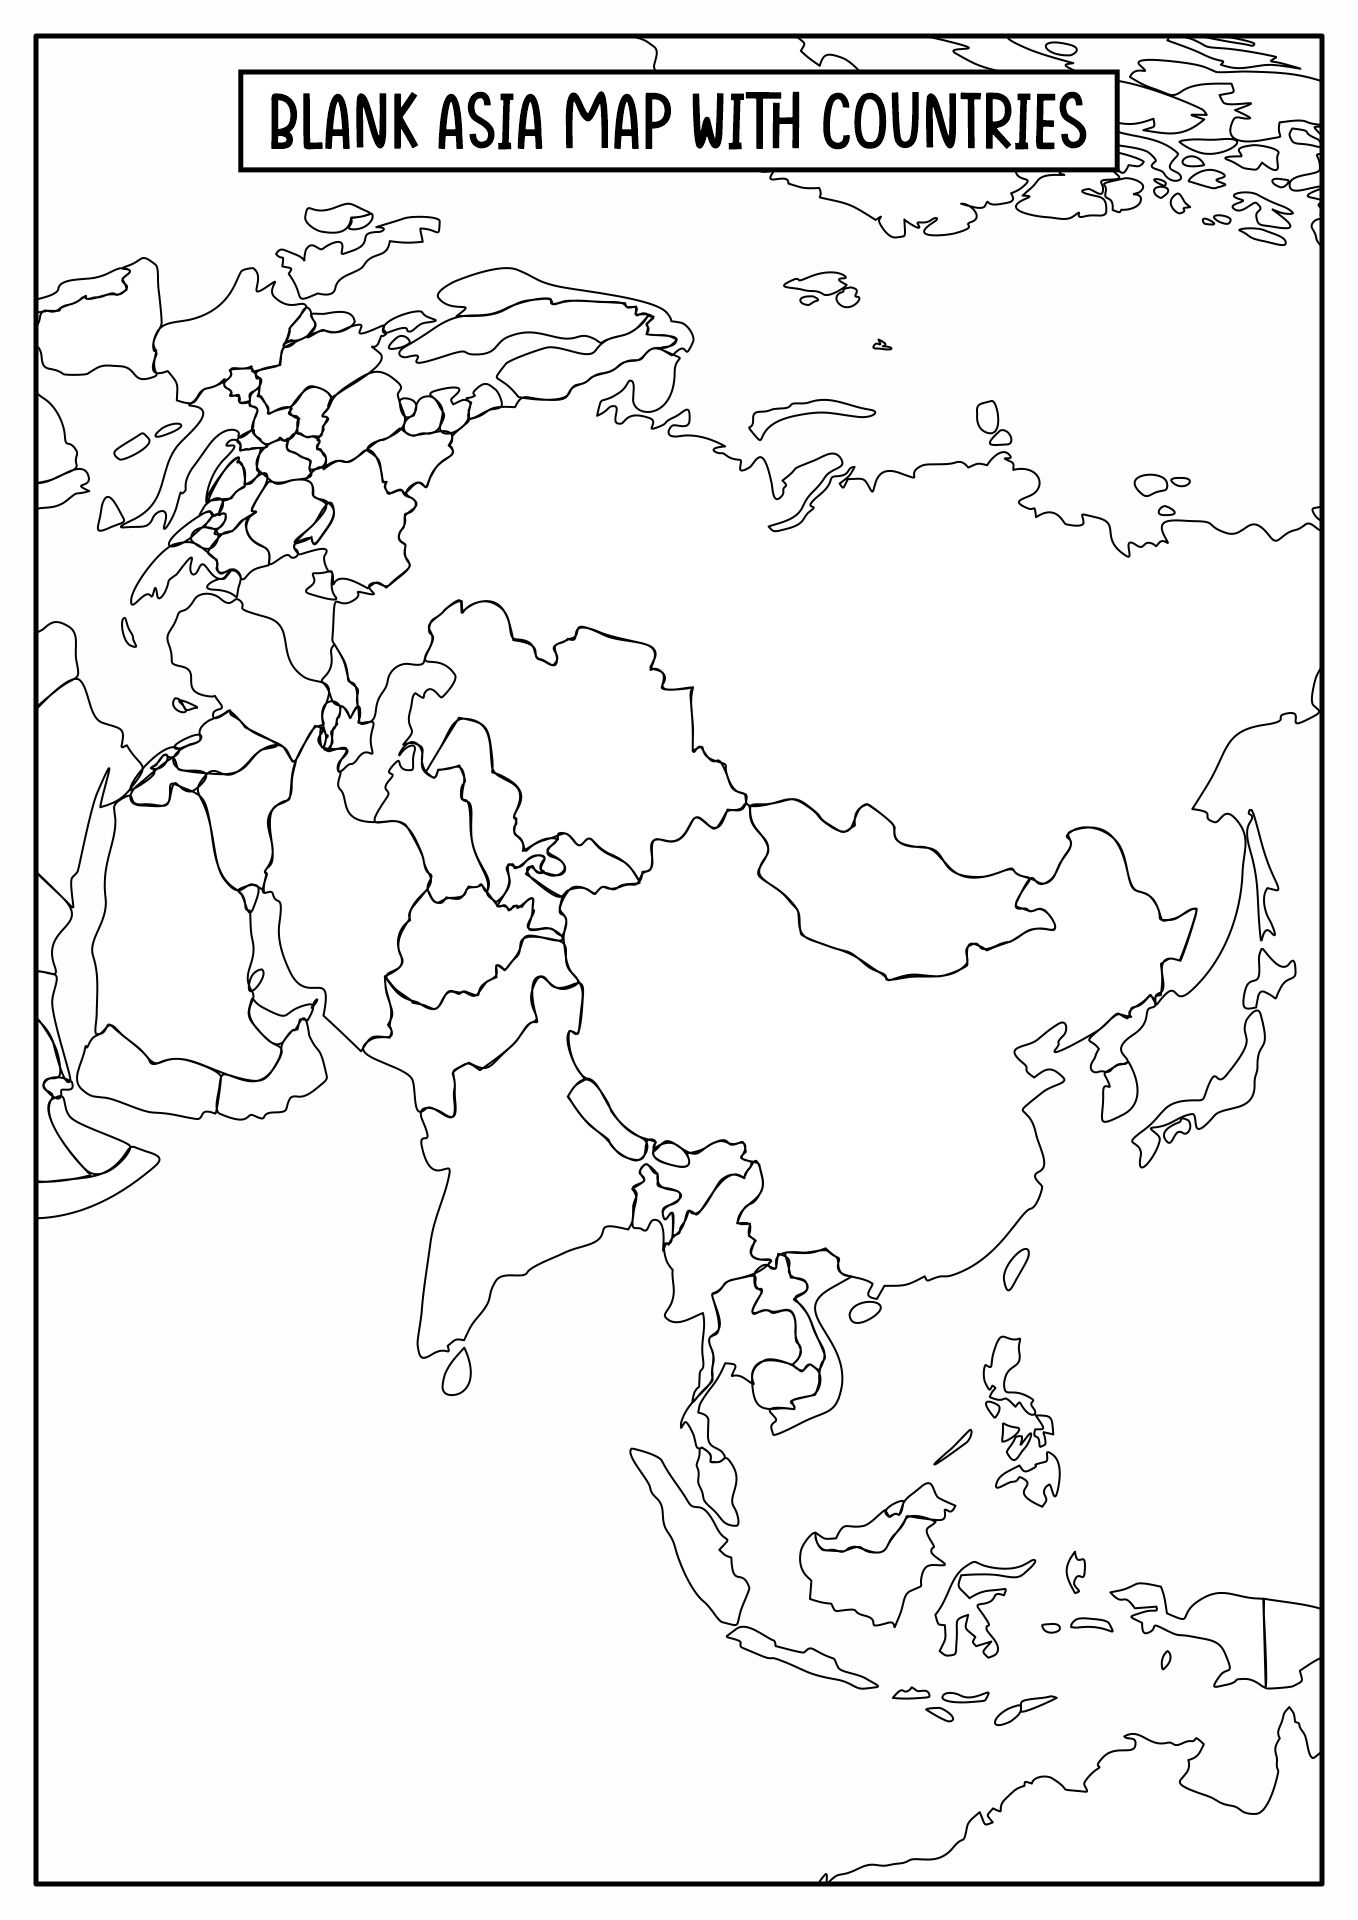 best-images-of-asia-blank-map-worksheets-printable-blank-asia-map-sexiz-pix